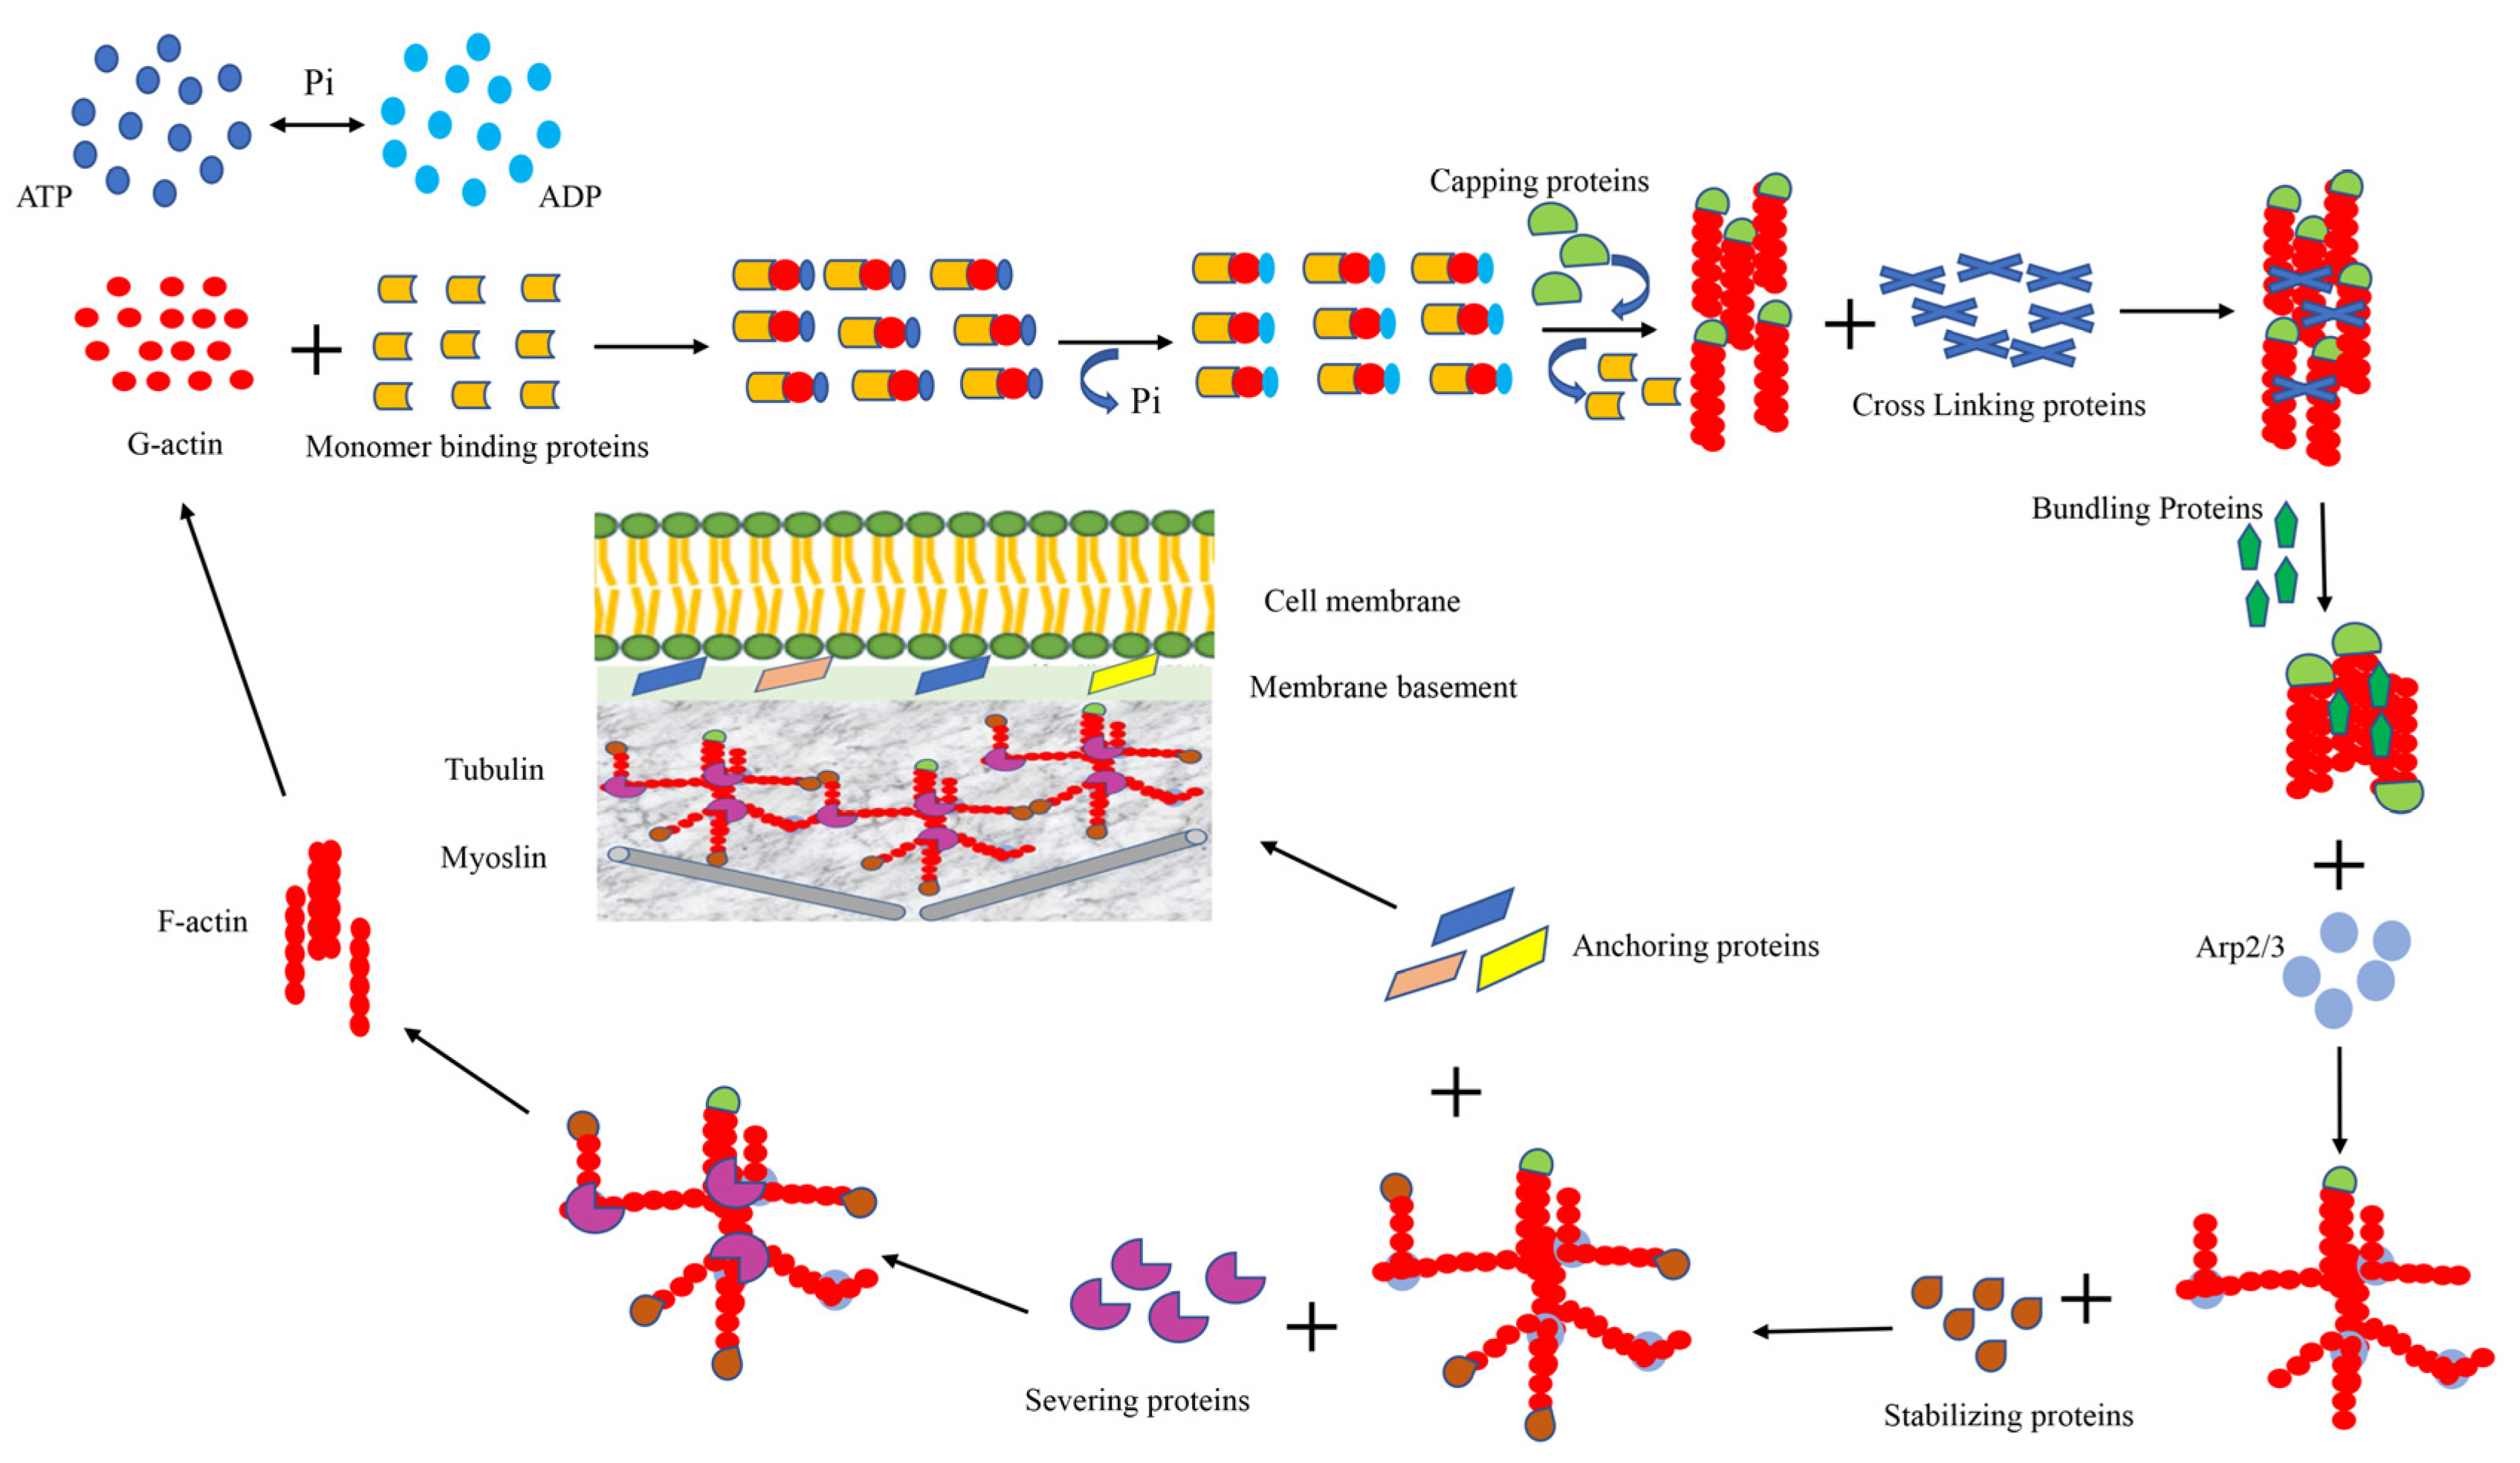 Chapter 10. Cell and Tissue Architecture: Cytoskeleton, Cell